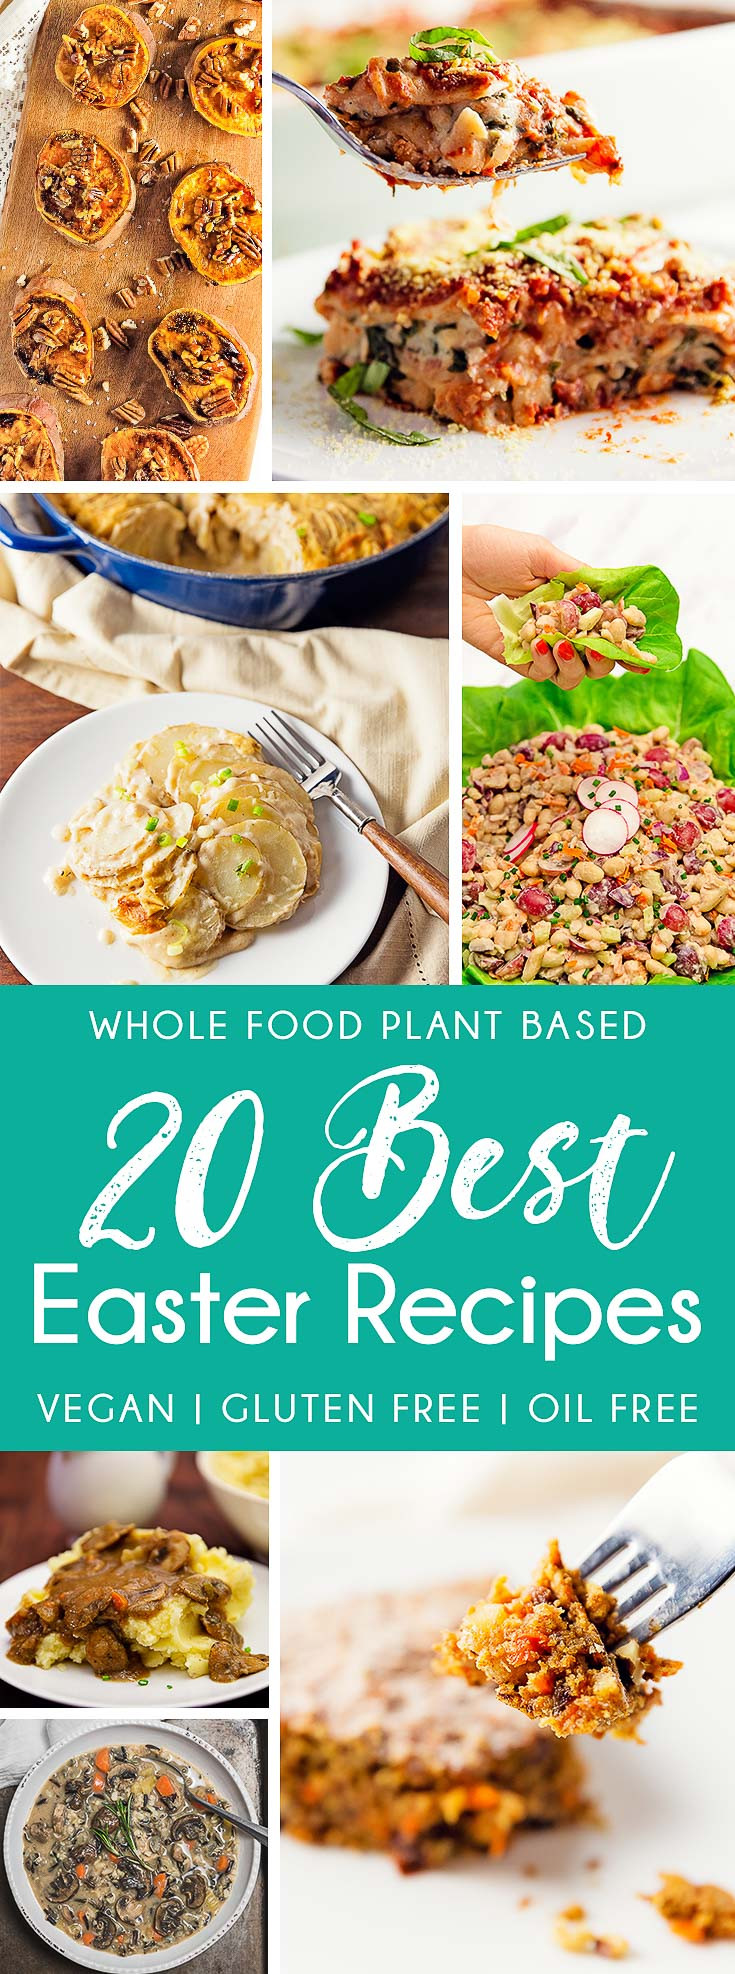 Whole Food Easter Menu
 20 Best Easter Recipes Monkey and Me Kitchen Adventures